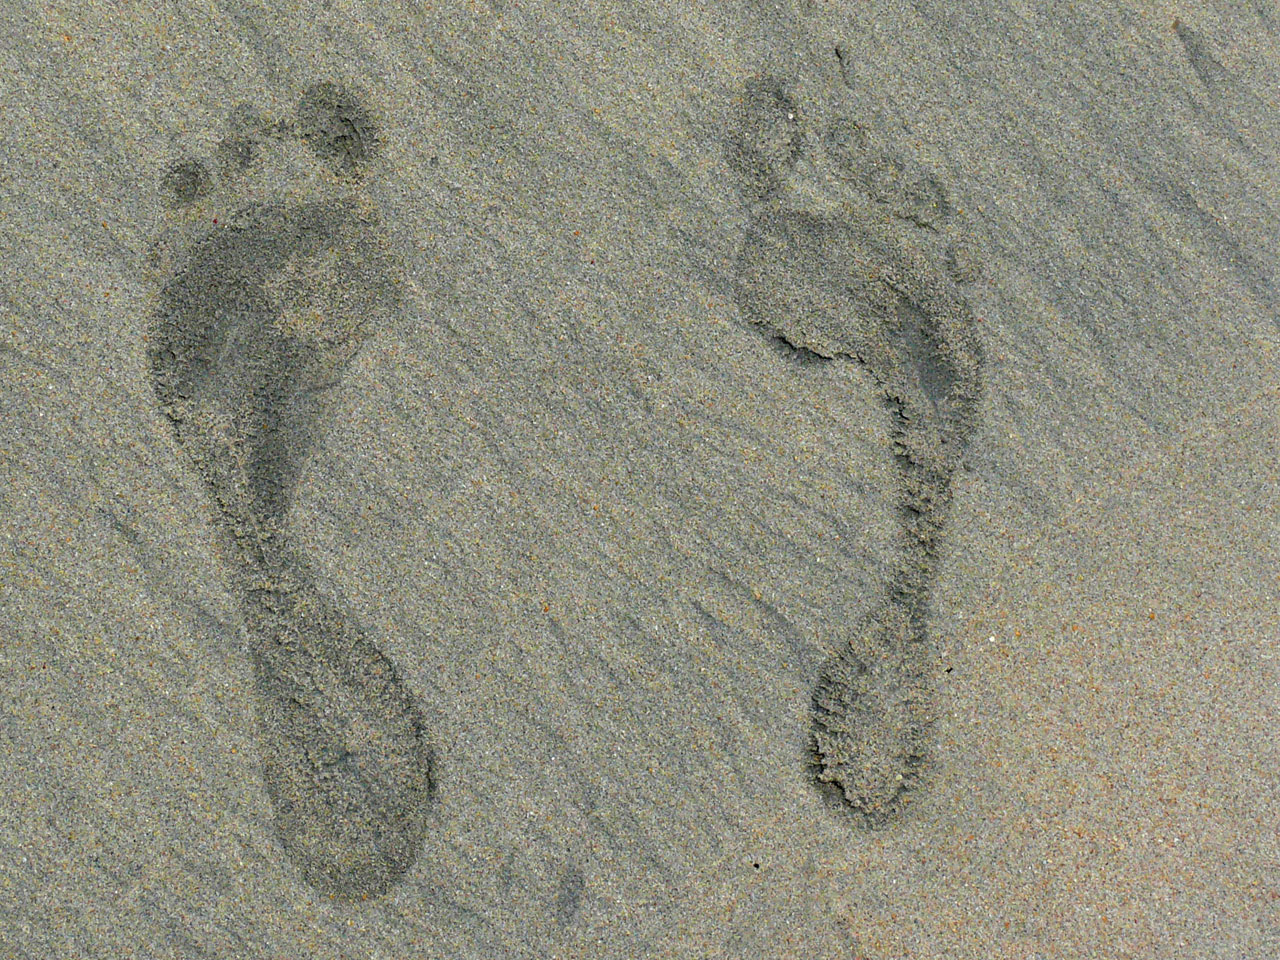 foot prints in sand sand beach free photo